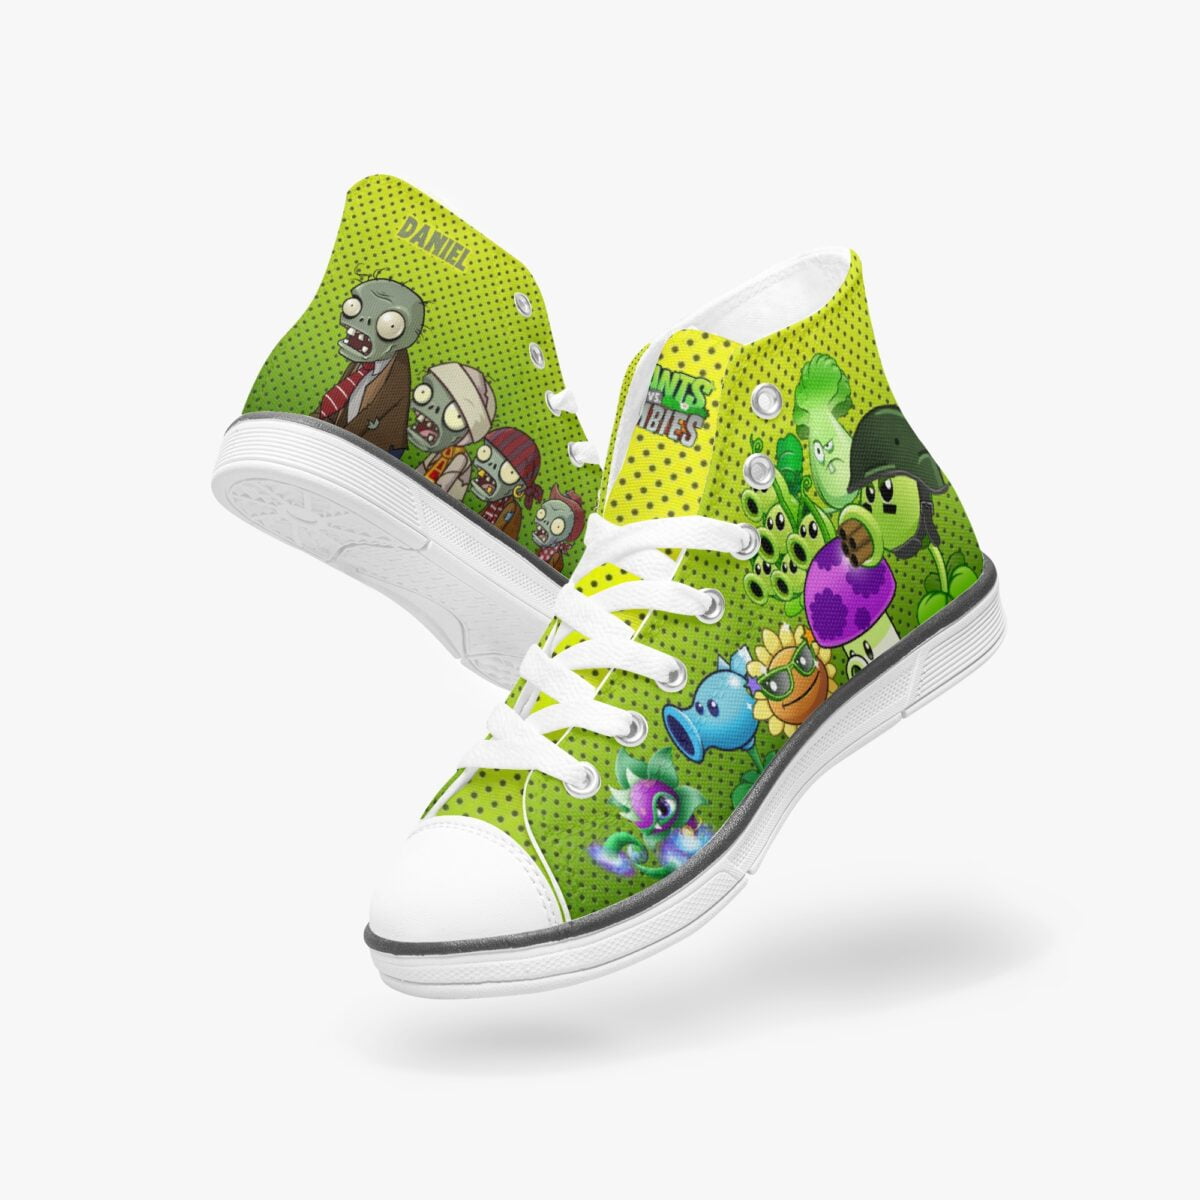 Plants vs Zombies Personalized High-Top Sneakers for Children Cool Kiddo 10